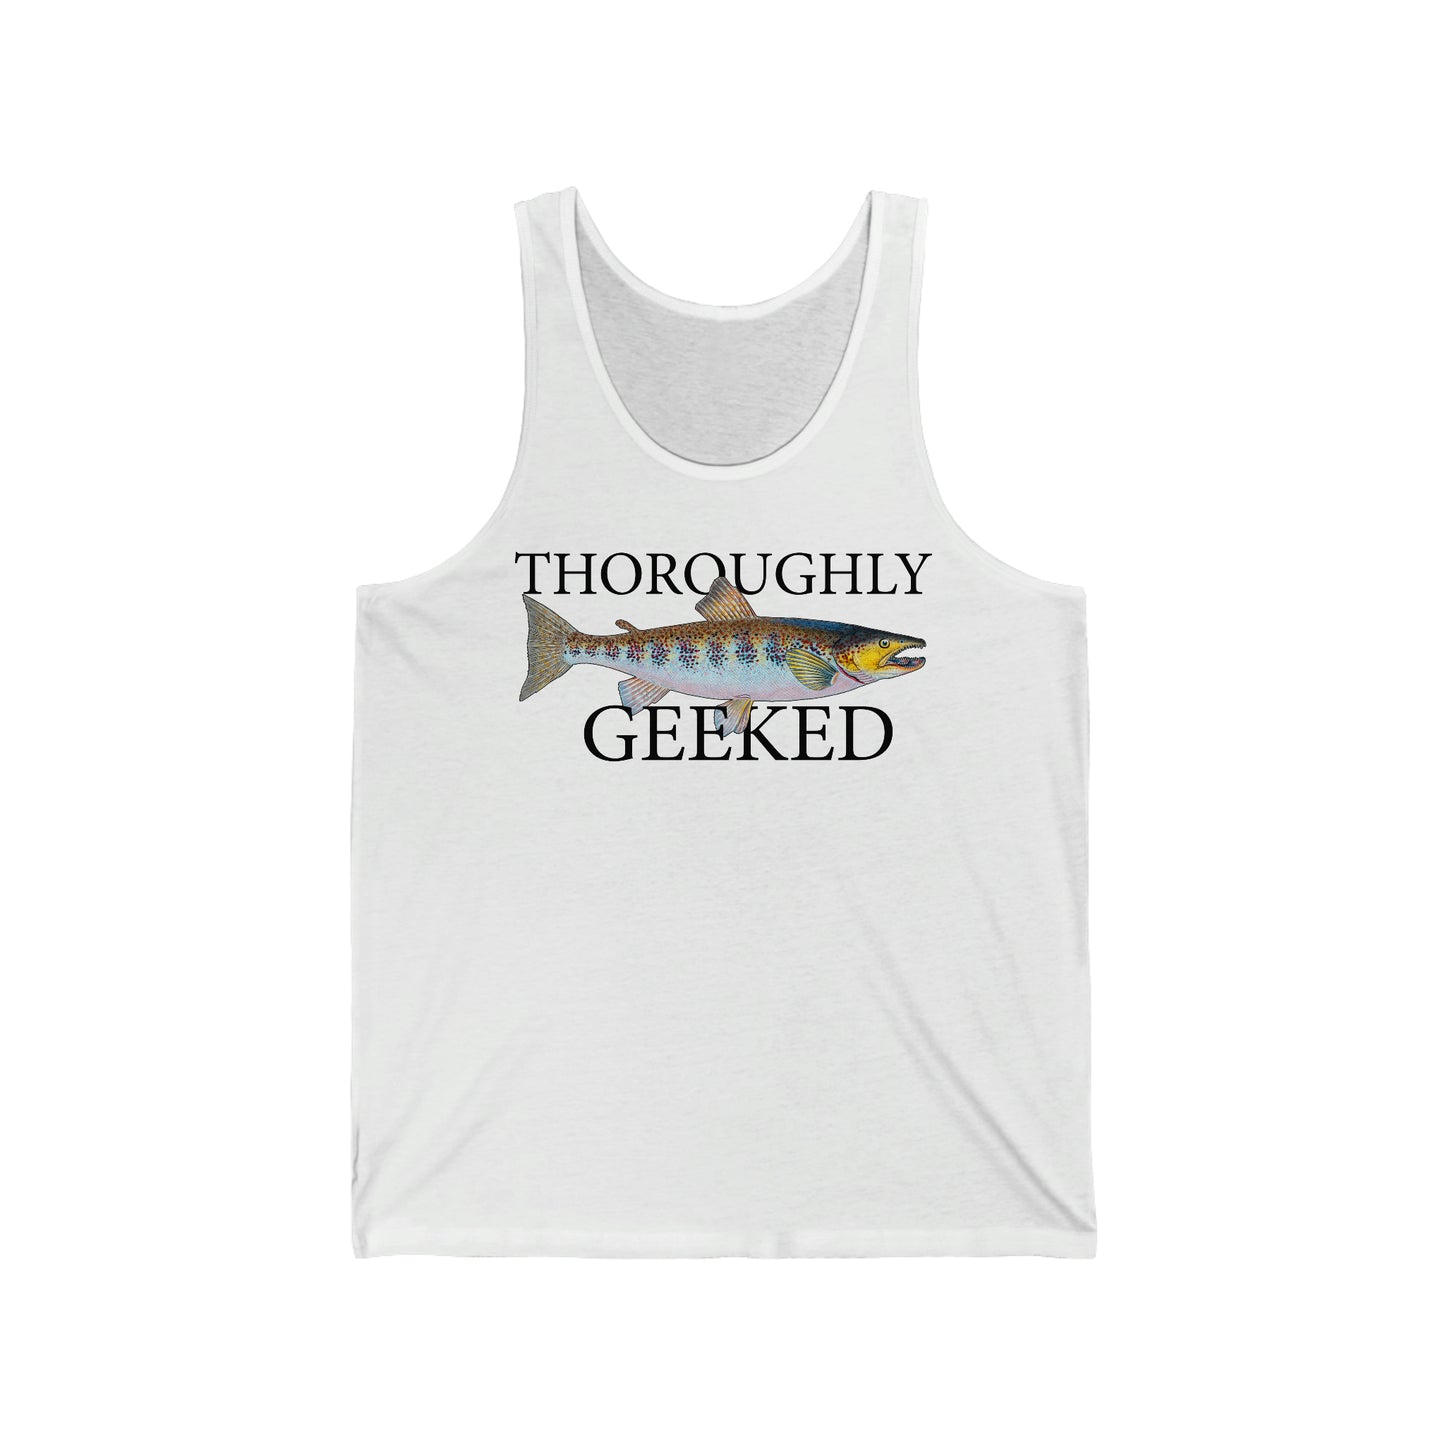 Thoroughly Geeked - Tank Edition